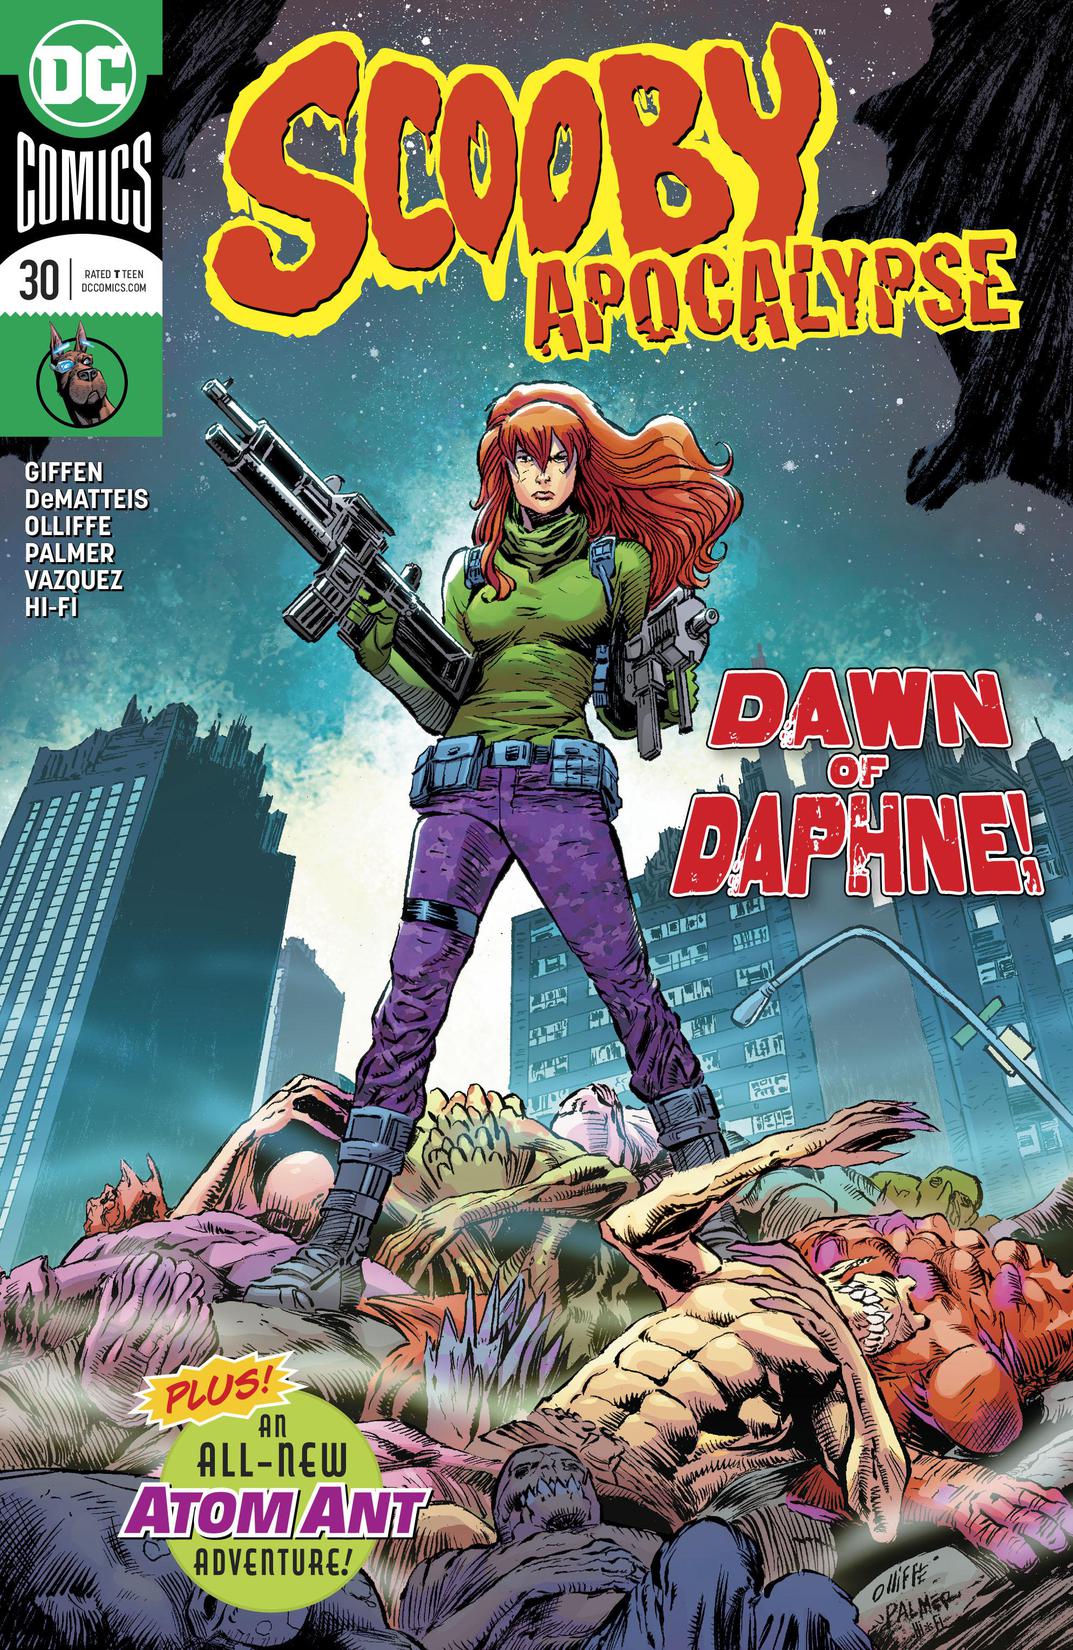 Scooby Apocalypse #30 preview images